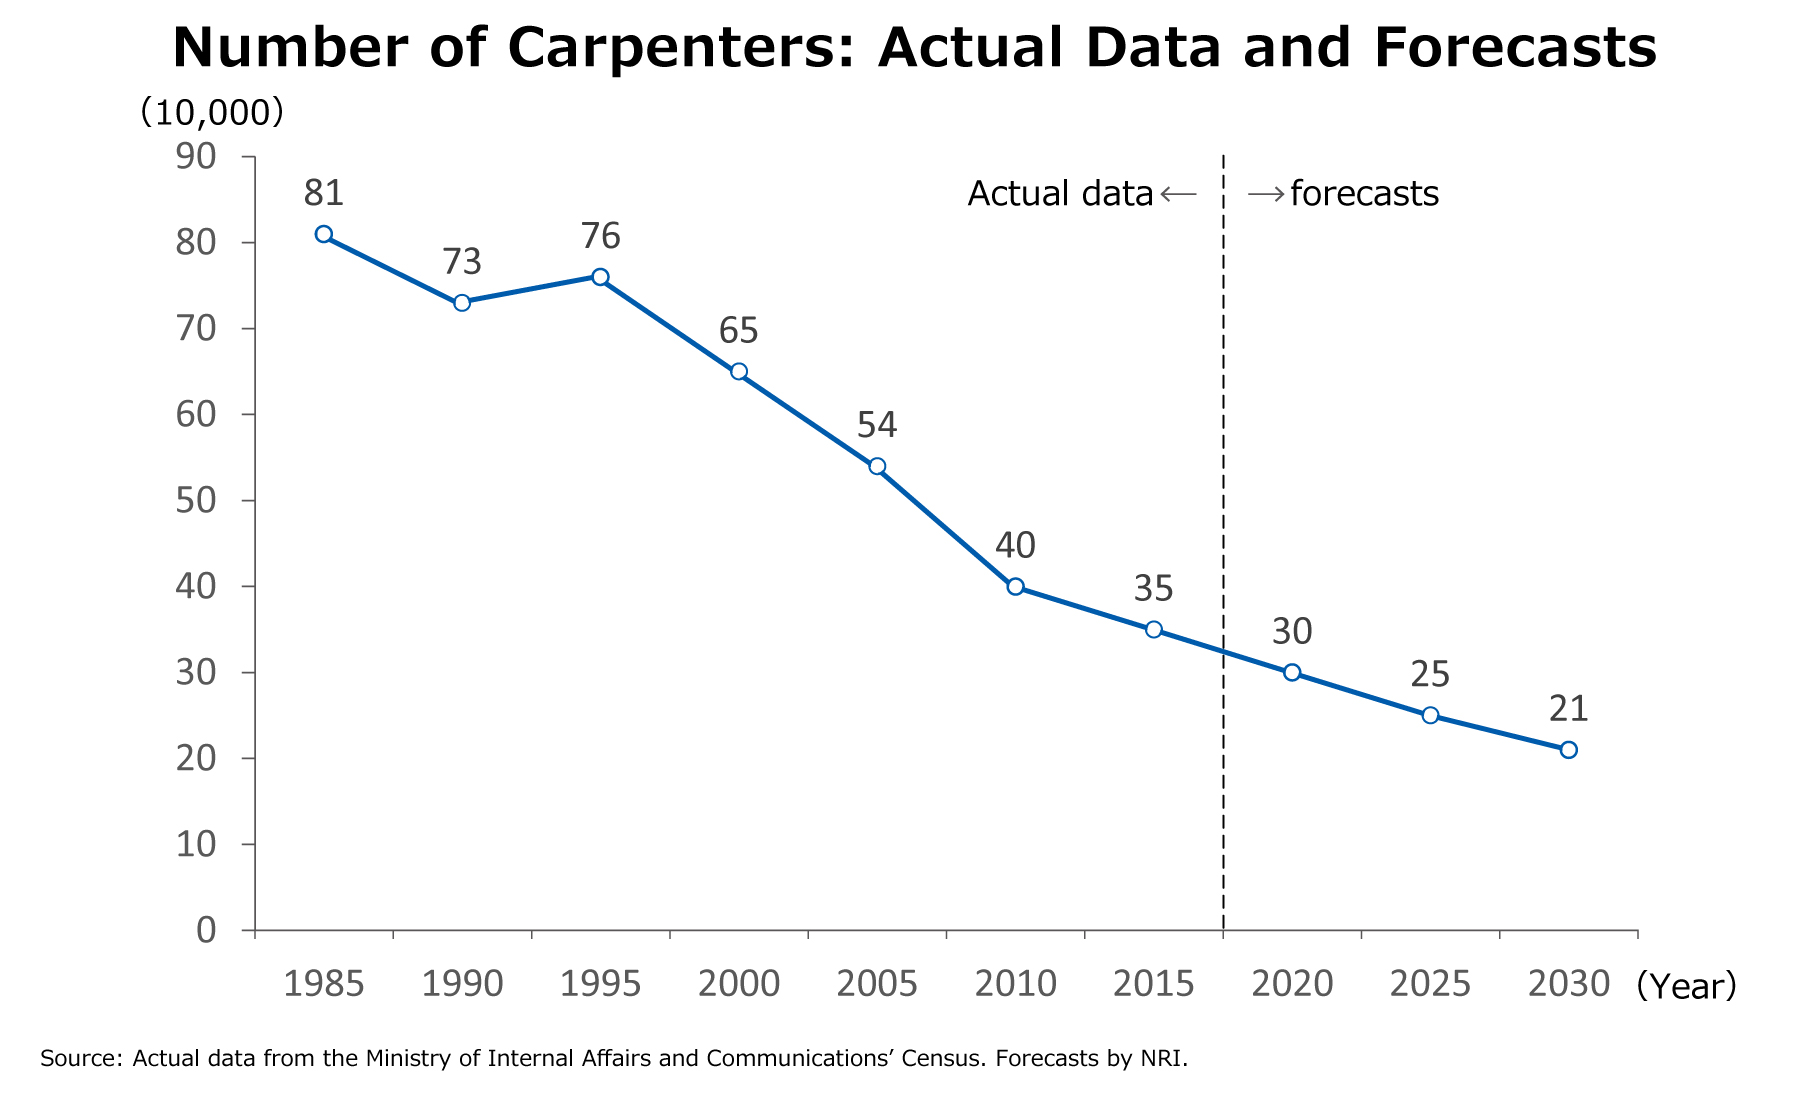 Number of Carpenters: Actual Data and Forecasts